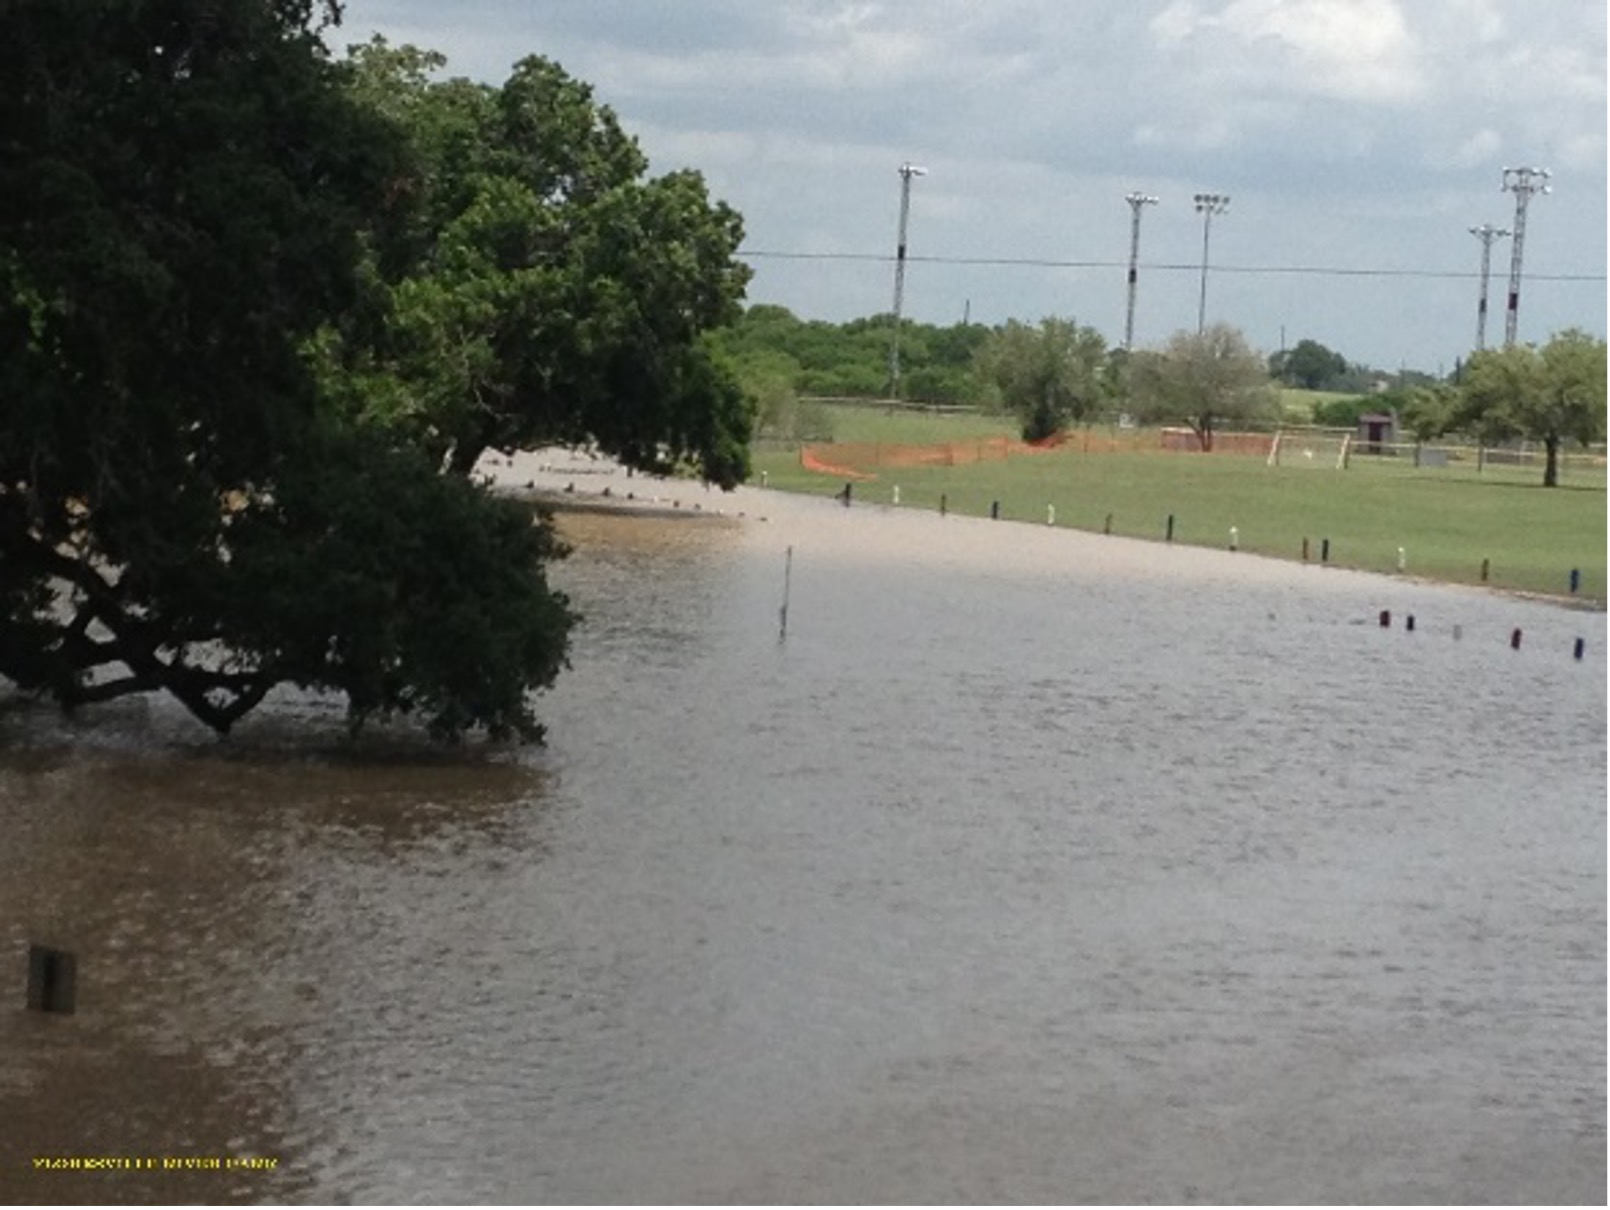 San Antonio River flooding in Wilson County in 2013.